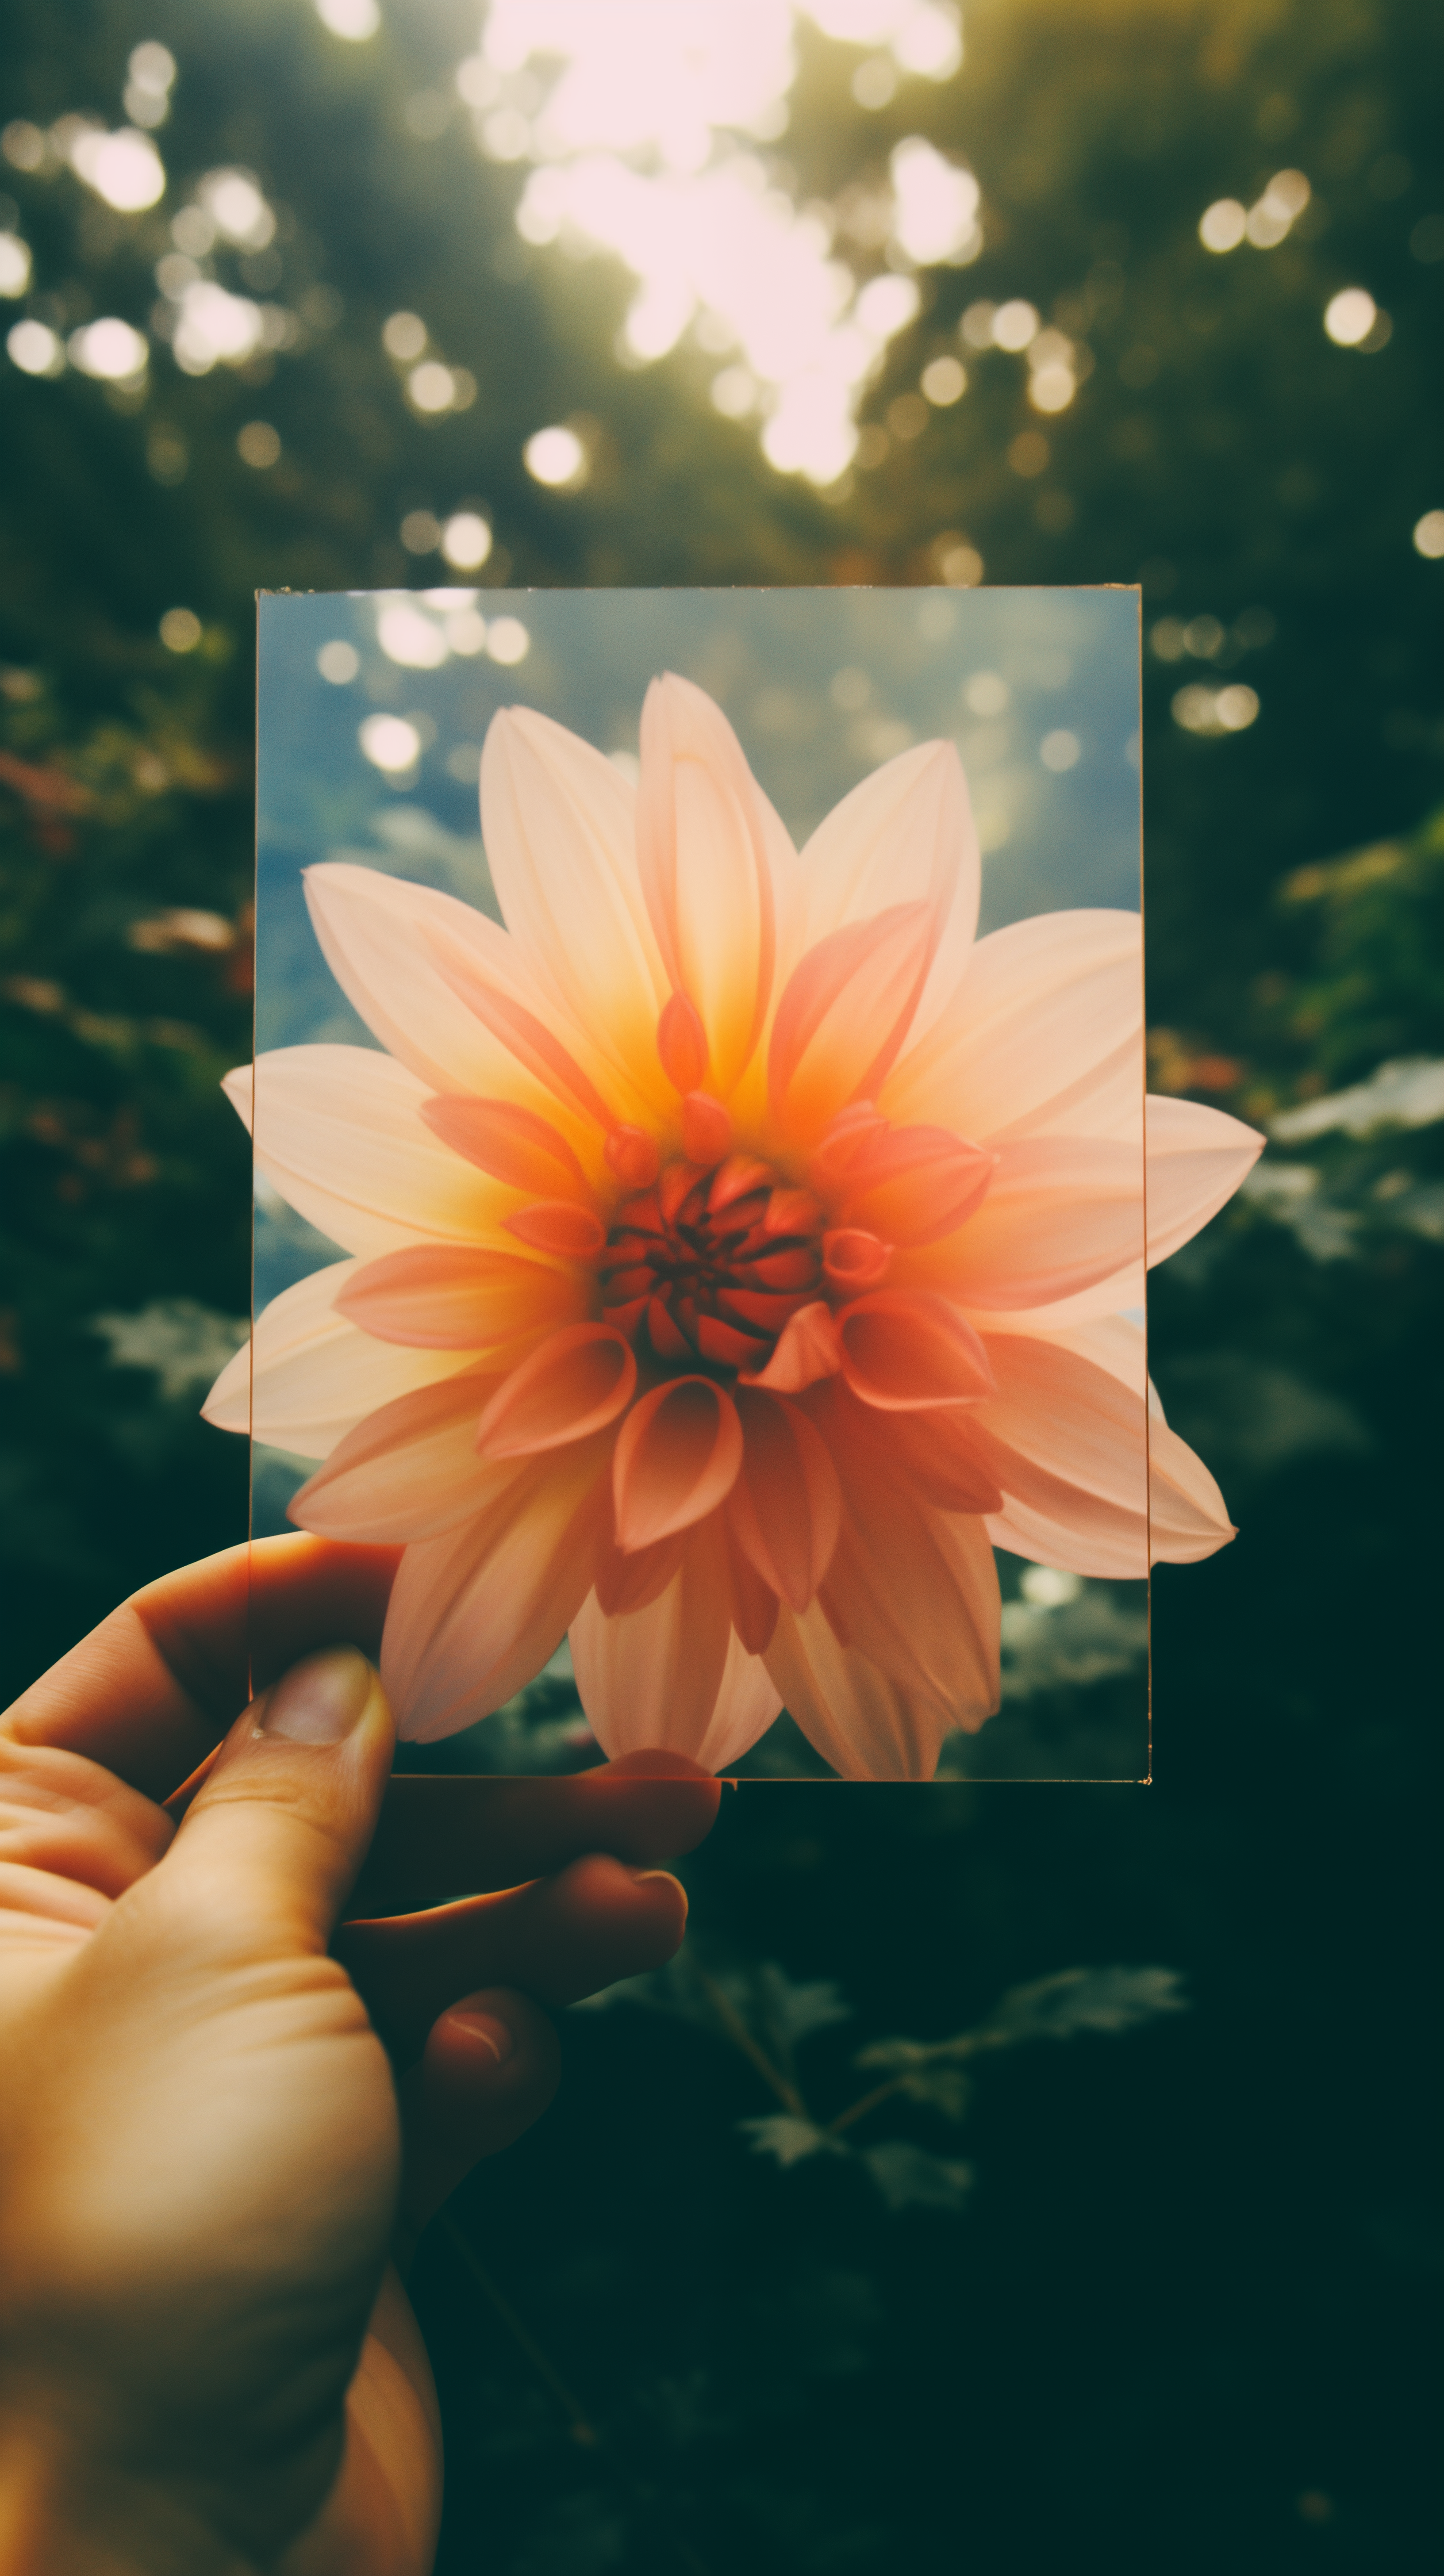 Orange dahlia flower phone wallpaper with a hand holding the image against a natural, sunlit background.